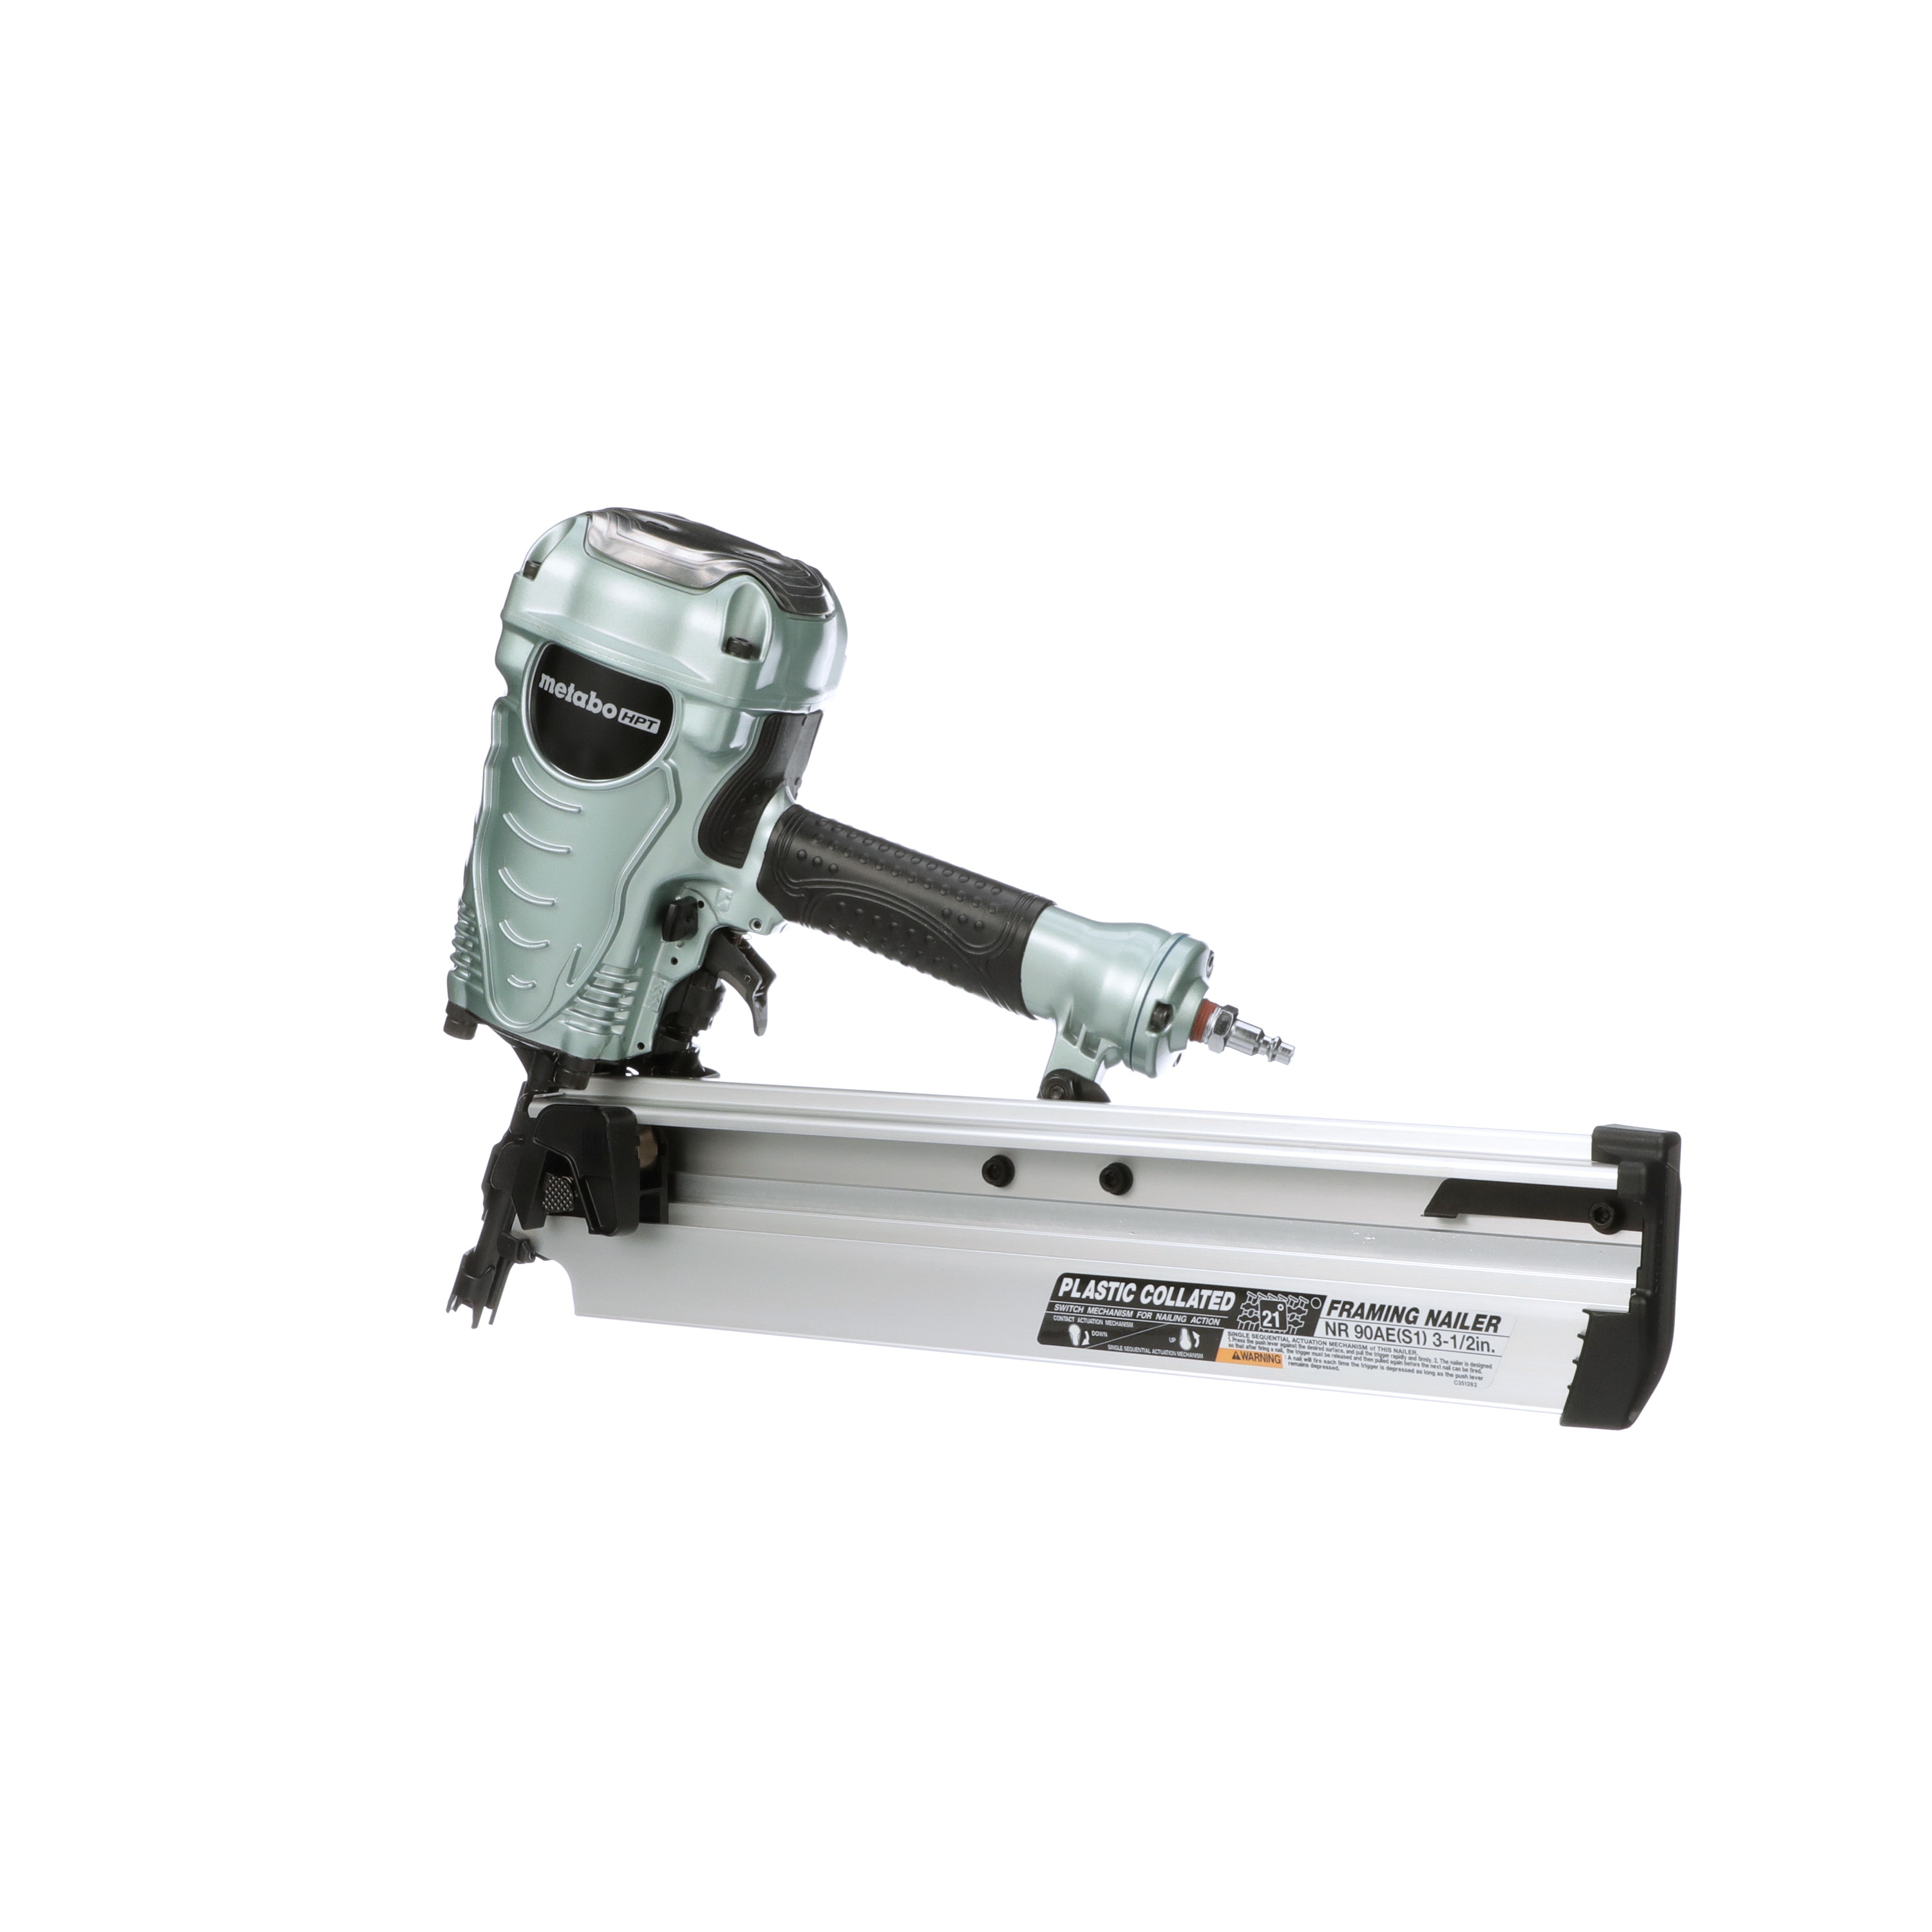 Selective Actuation Switch Renewed 21 Degree Magazine S Rafter Hook 5-Year Warranty Pneumatic Framing Nailer Metabo HPT NR83A5 2-Inch up to 3-1/4-Inch Plastic Collated Full Head Nails 